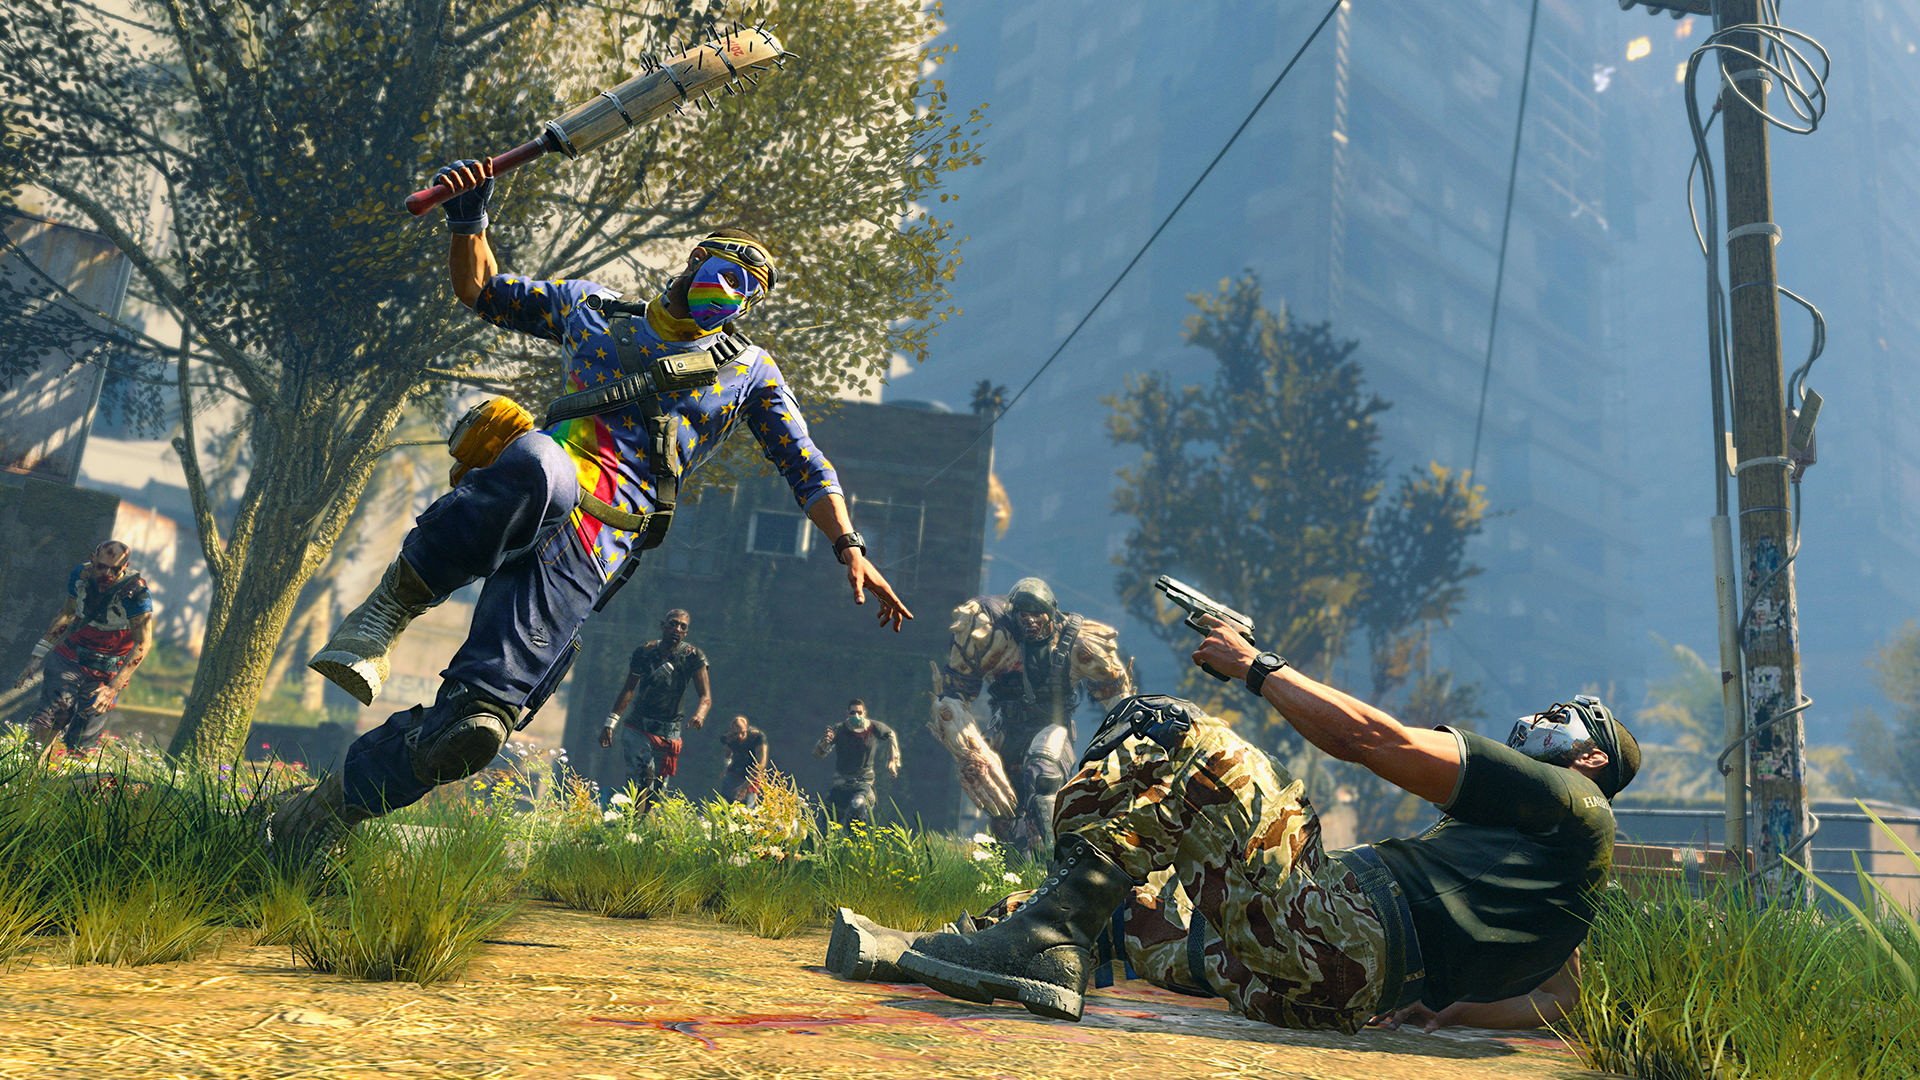 Dying Light 1 Gets A Next-Gen Patch Improving Performance On PS5 And PS4  Pro - GameSpot